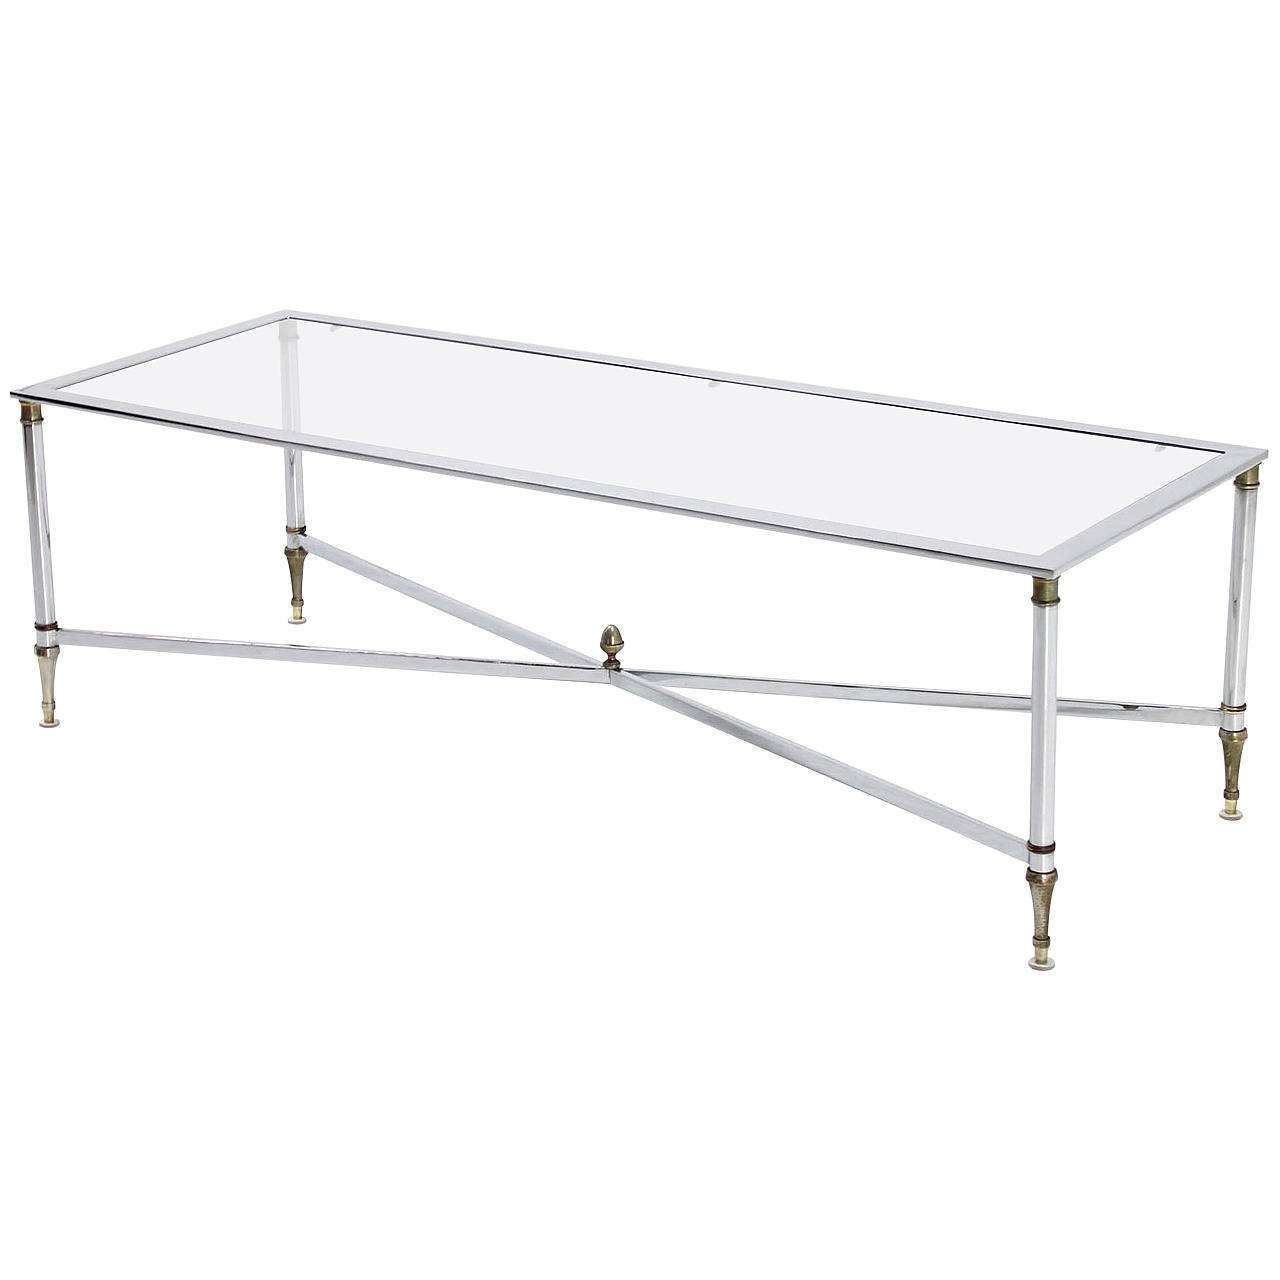 Preferred Chrome And Glass Coffee Tables Inside Chrome Brass X Base Glass Top Long Rectangle Coffee Table For Sale (View 1 of 20)